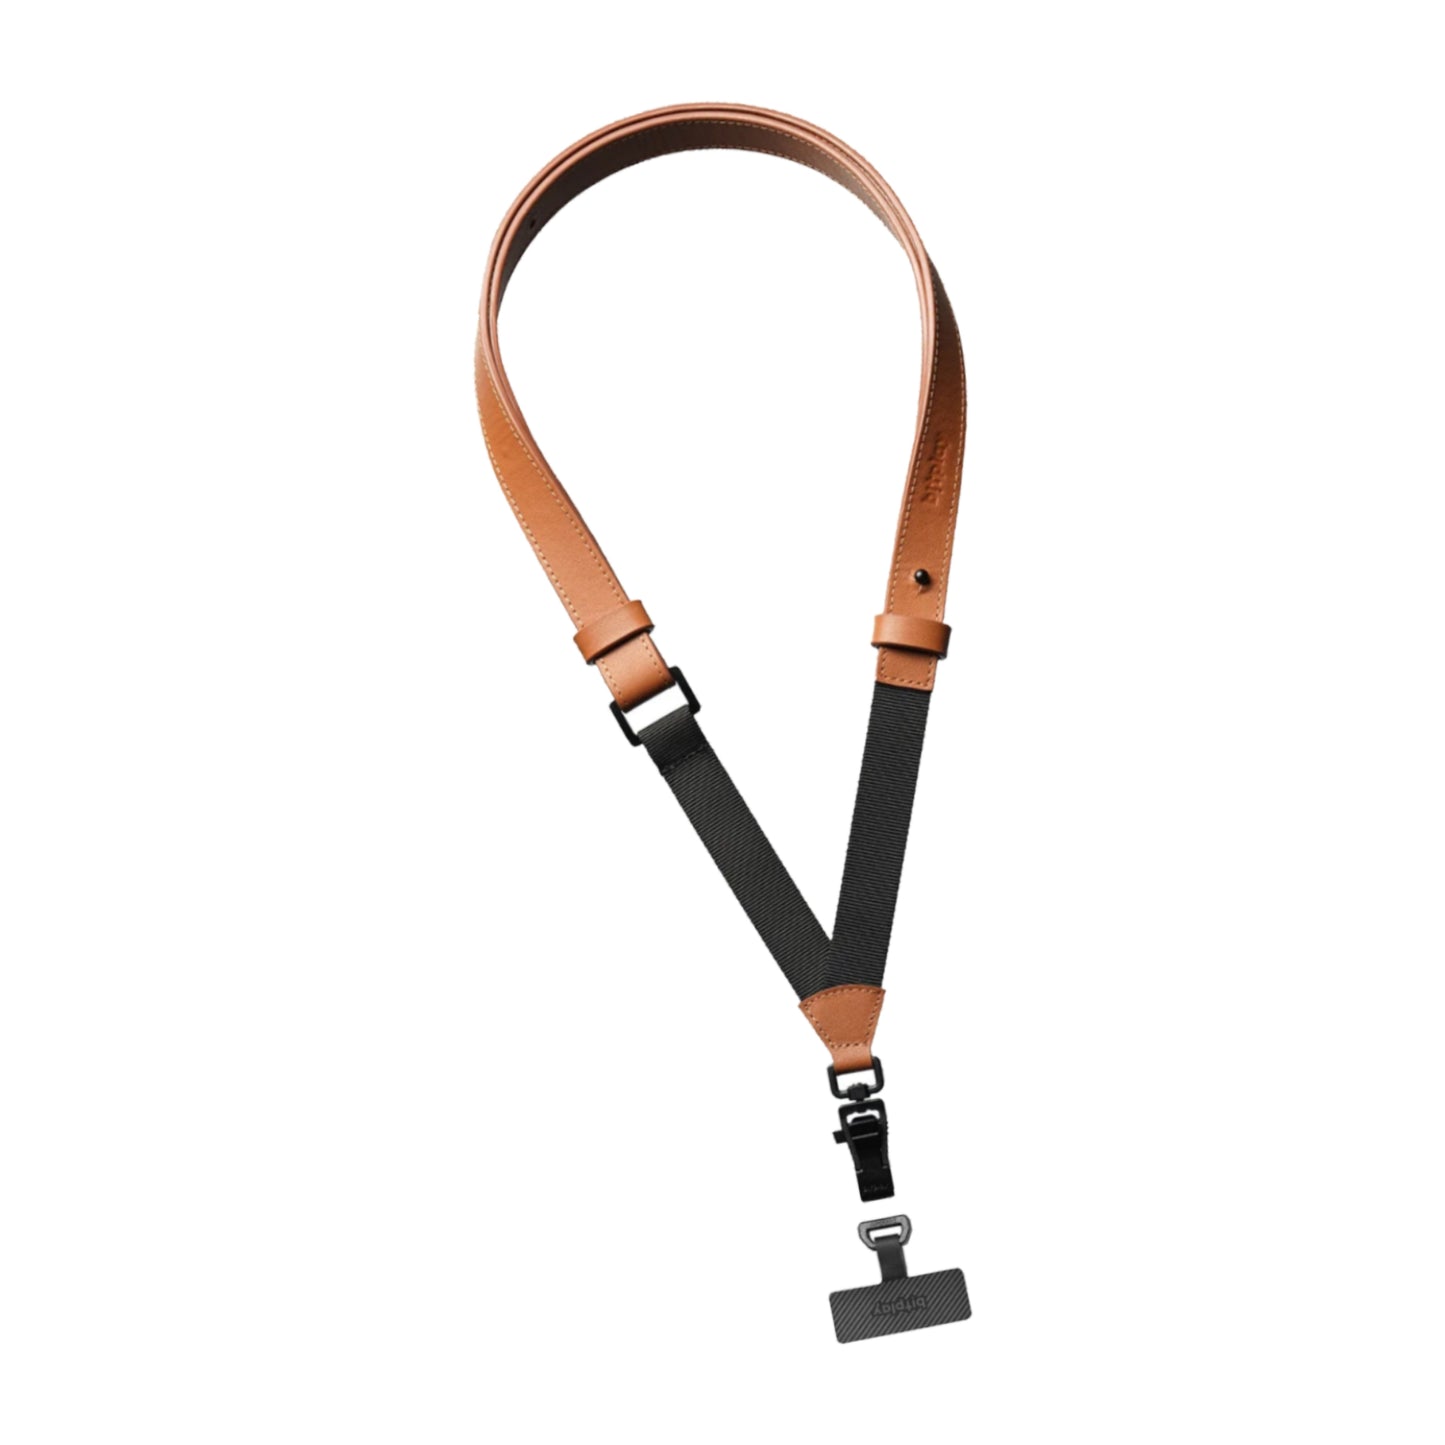 Bitplay Genuine Leather Strap 20mm Lanyard - Strap Adapter Included